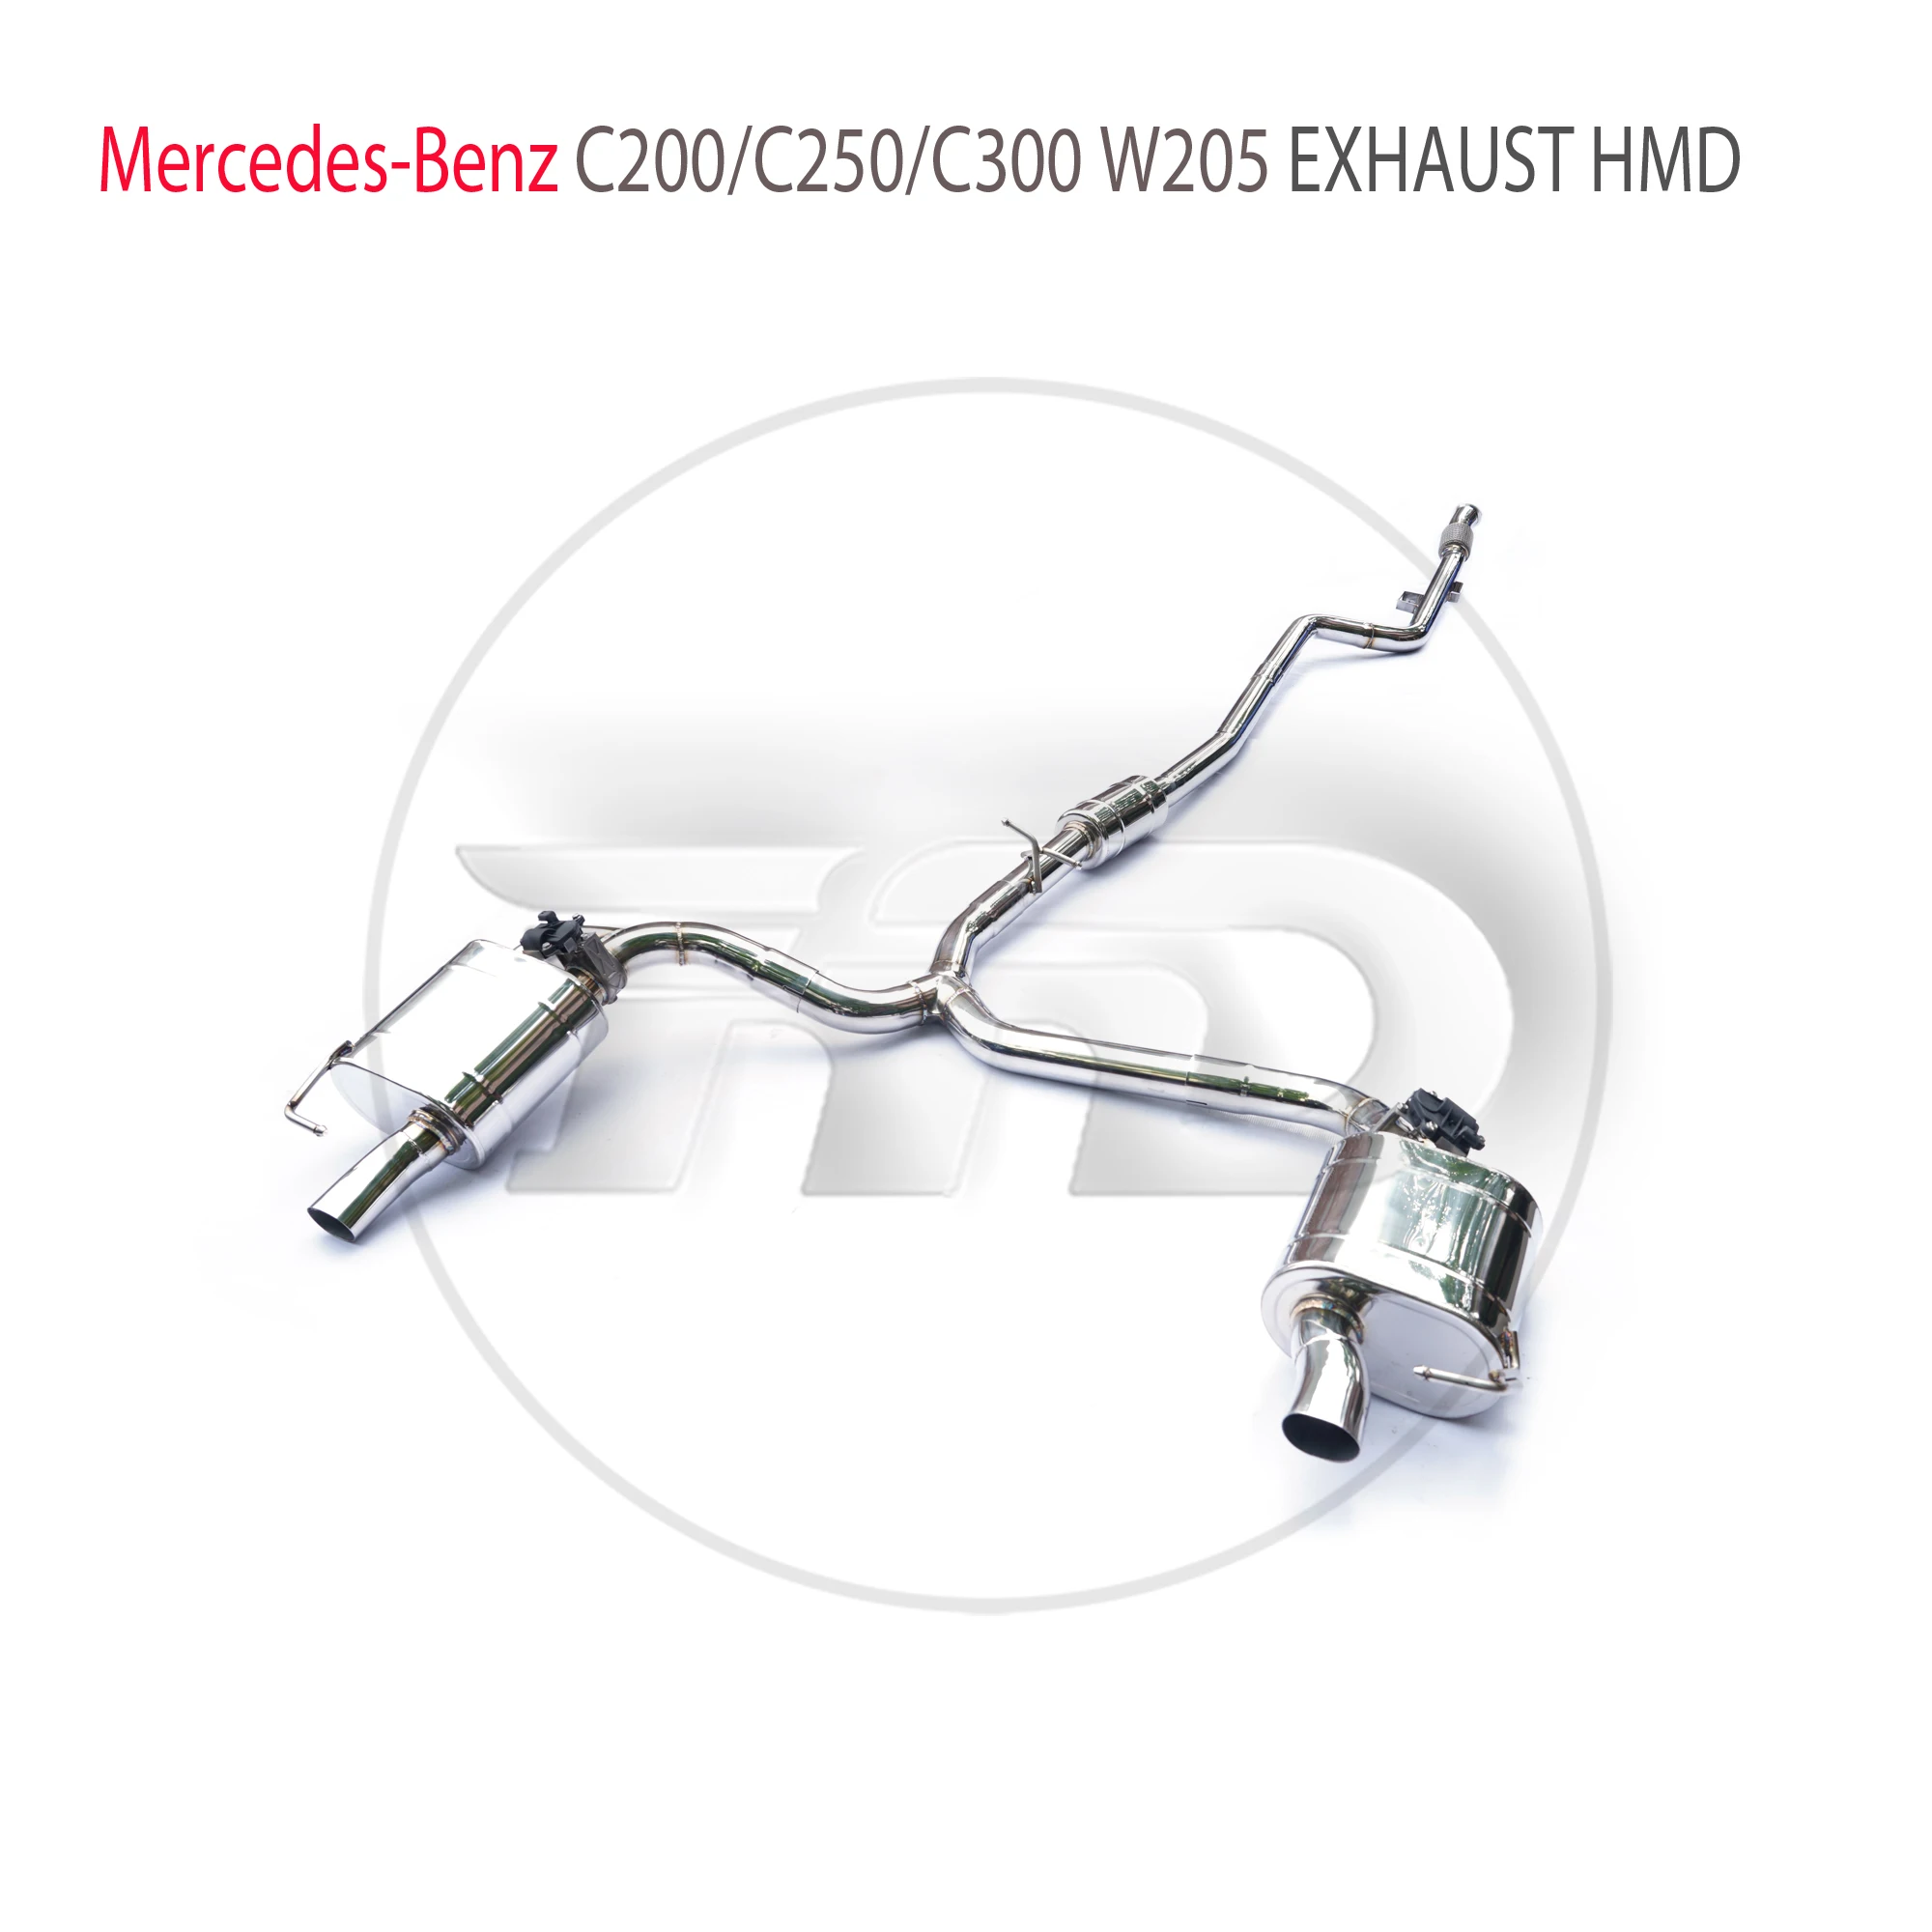 

HMD Stainless Steel Exhaust System Performance Catback for Mercedes Benz C200 C250 C300 W205 1.5T 2.0T Valve Muffler